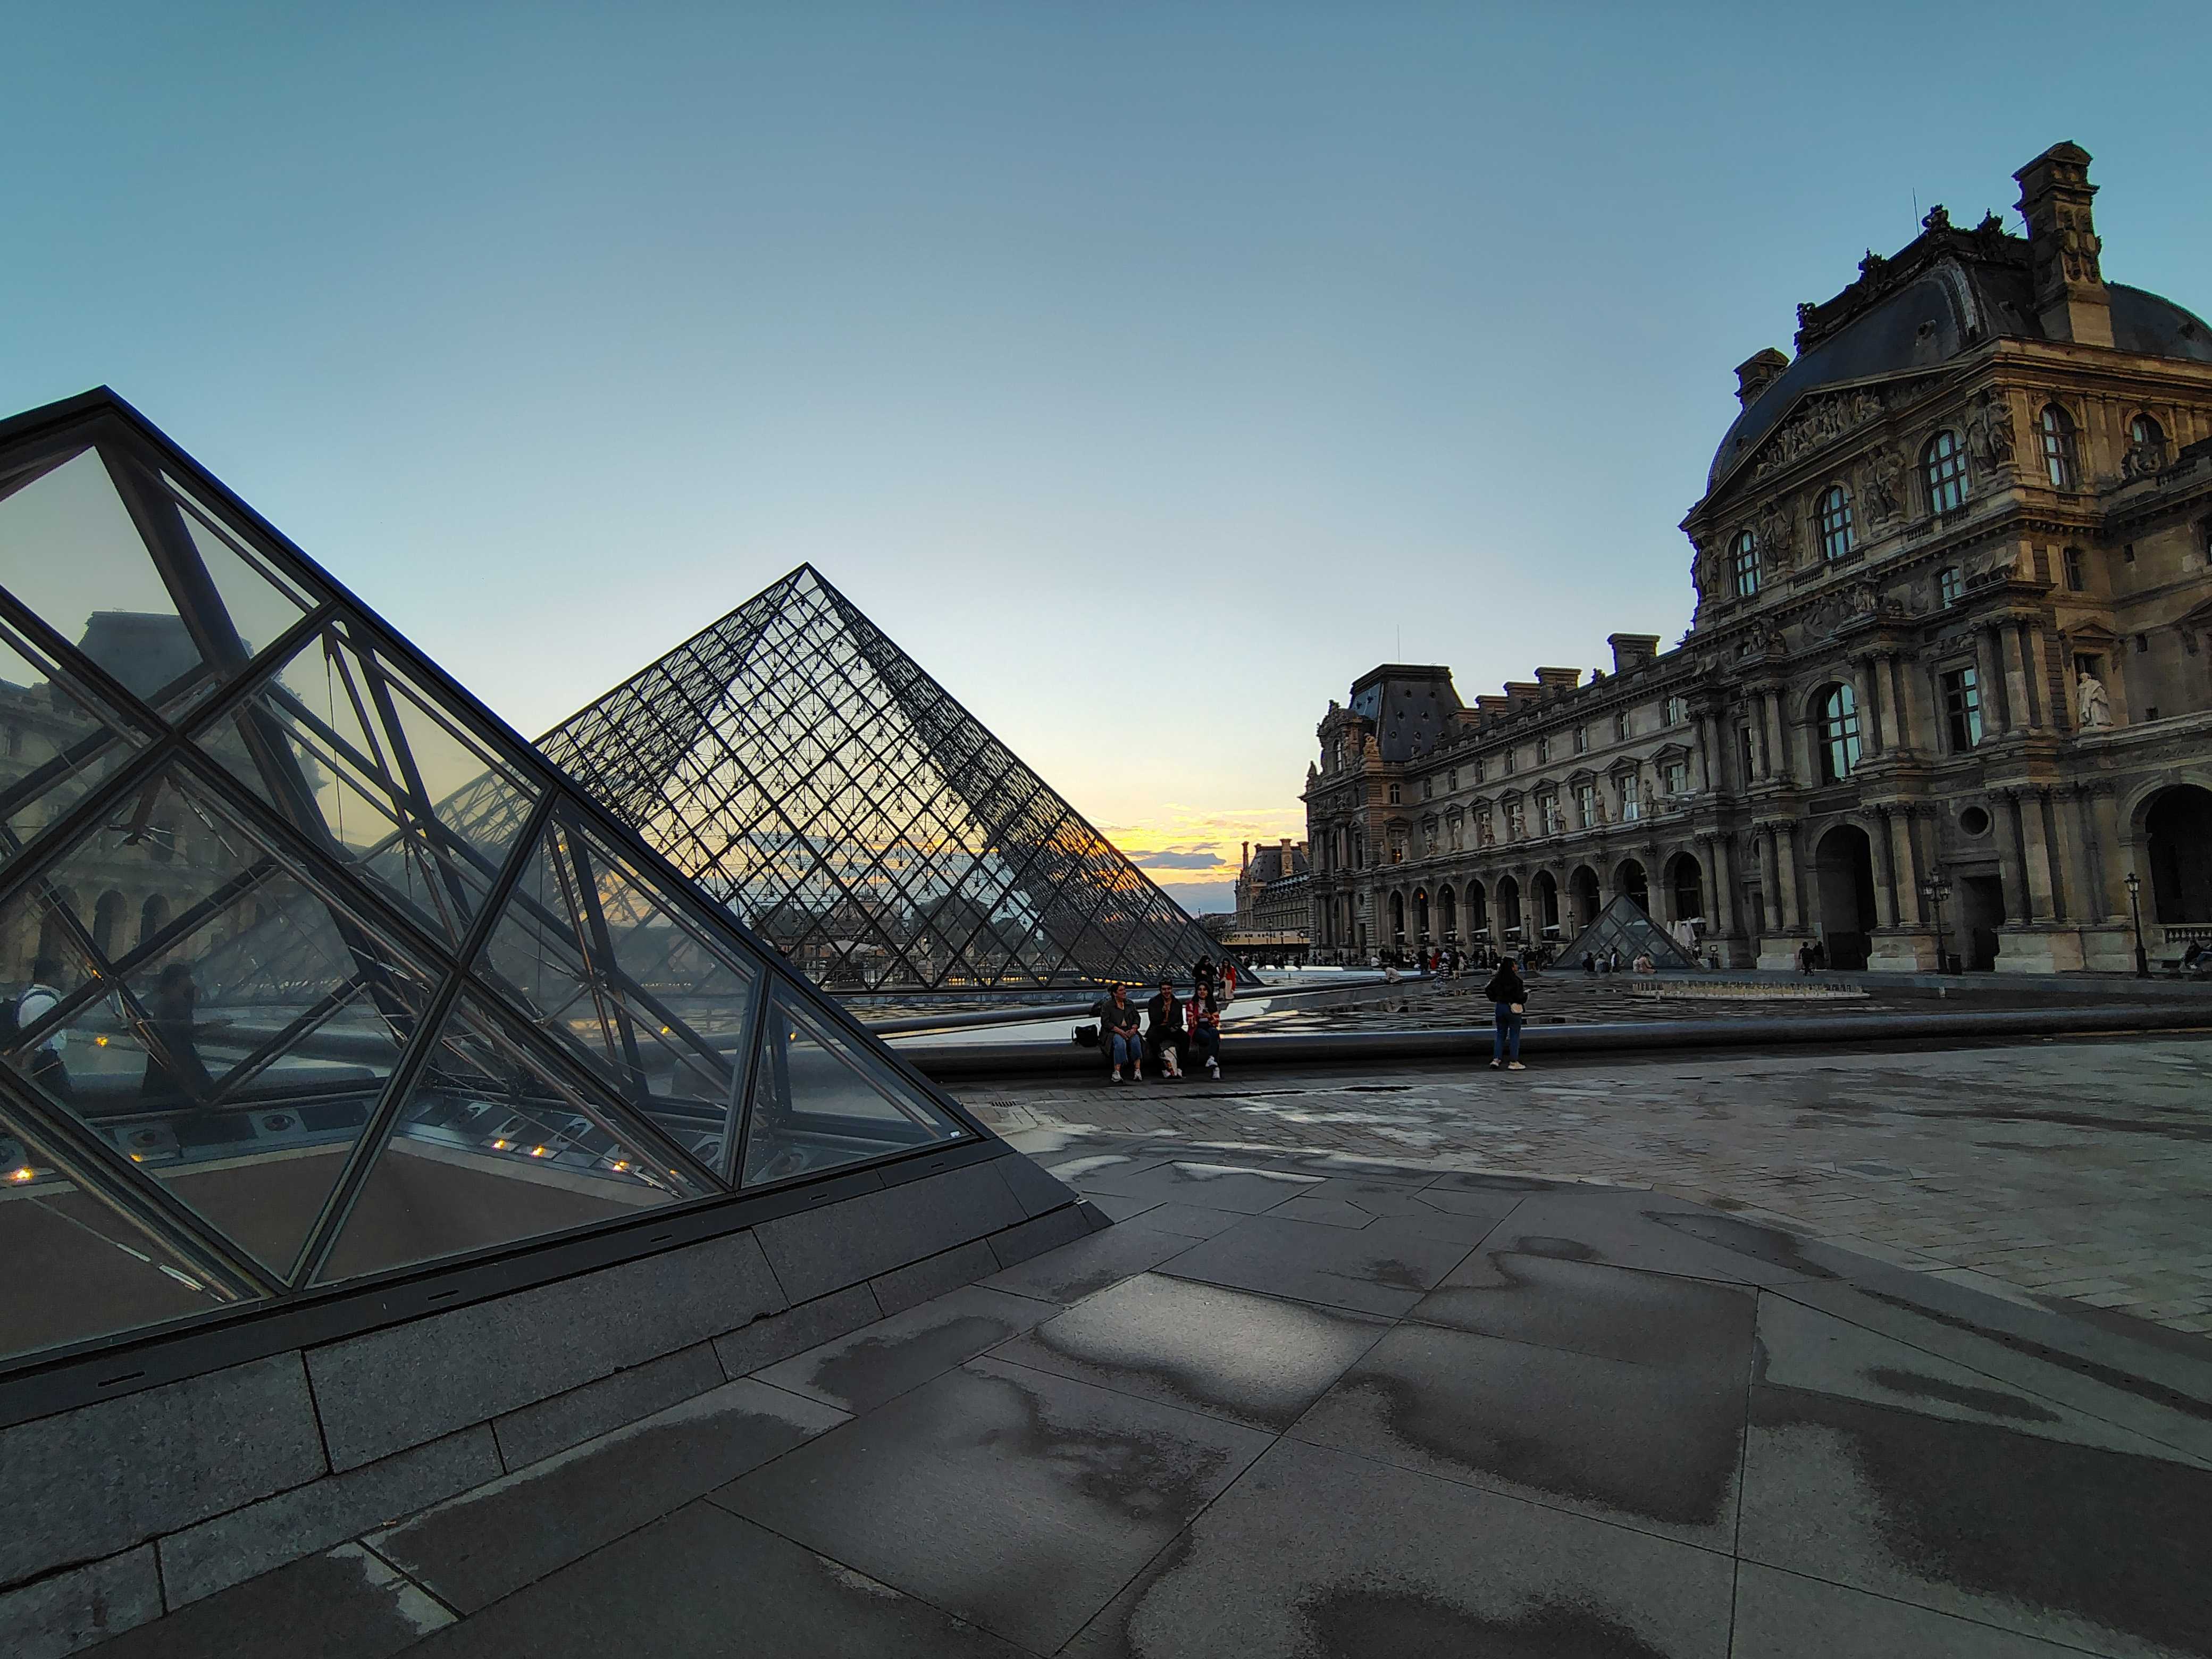 The Pyramide du Louvre at sunset